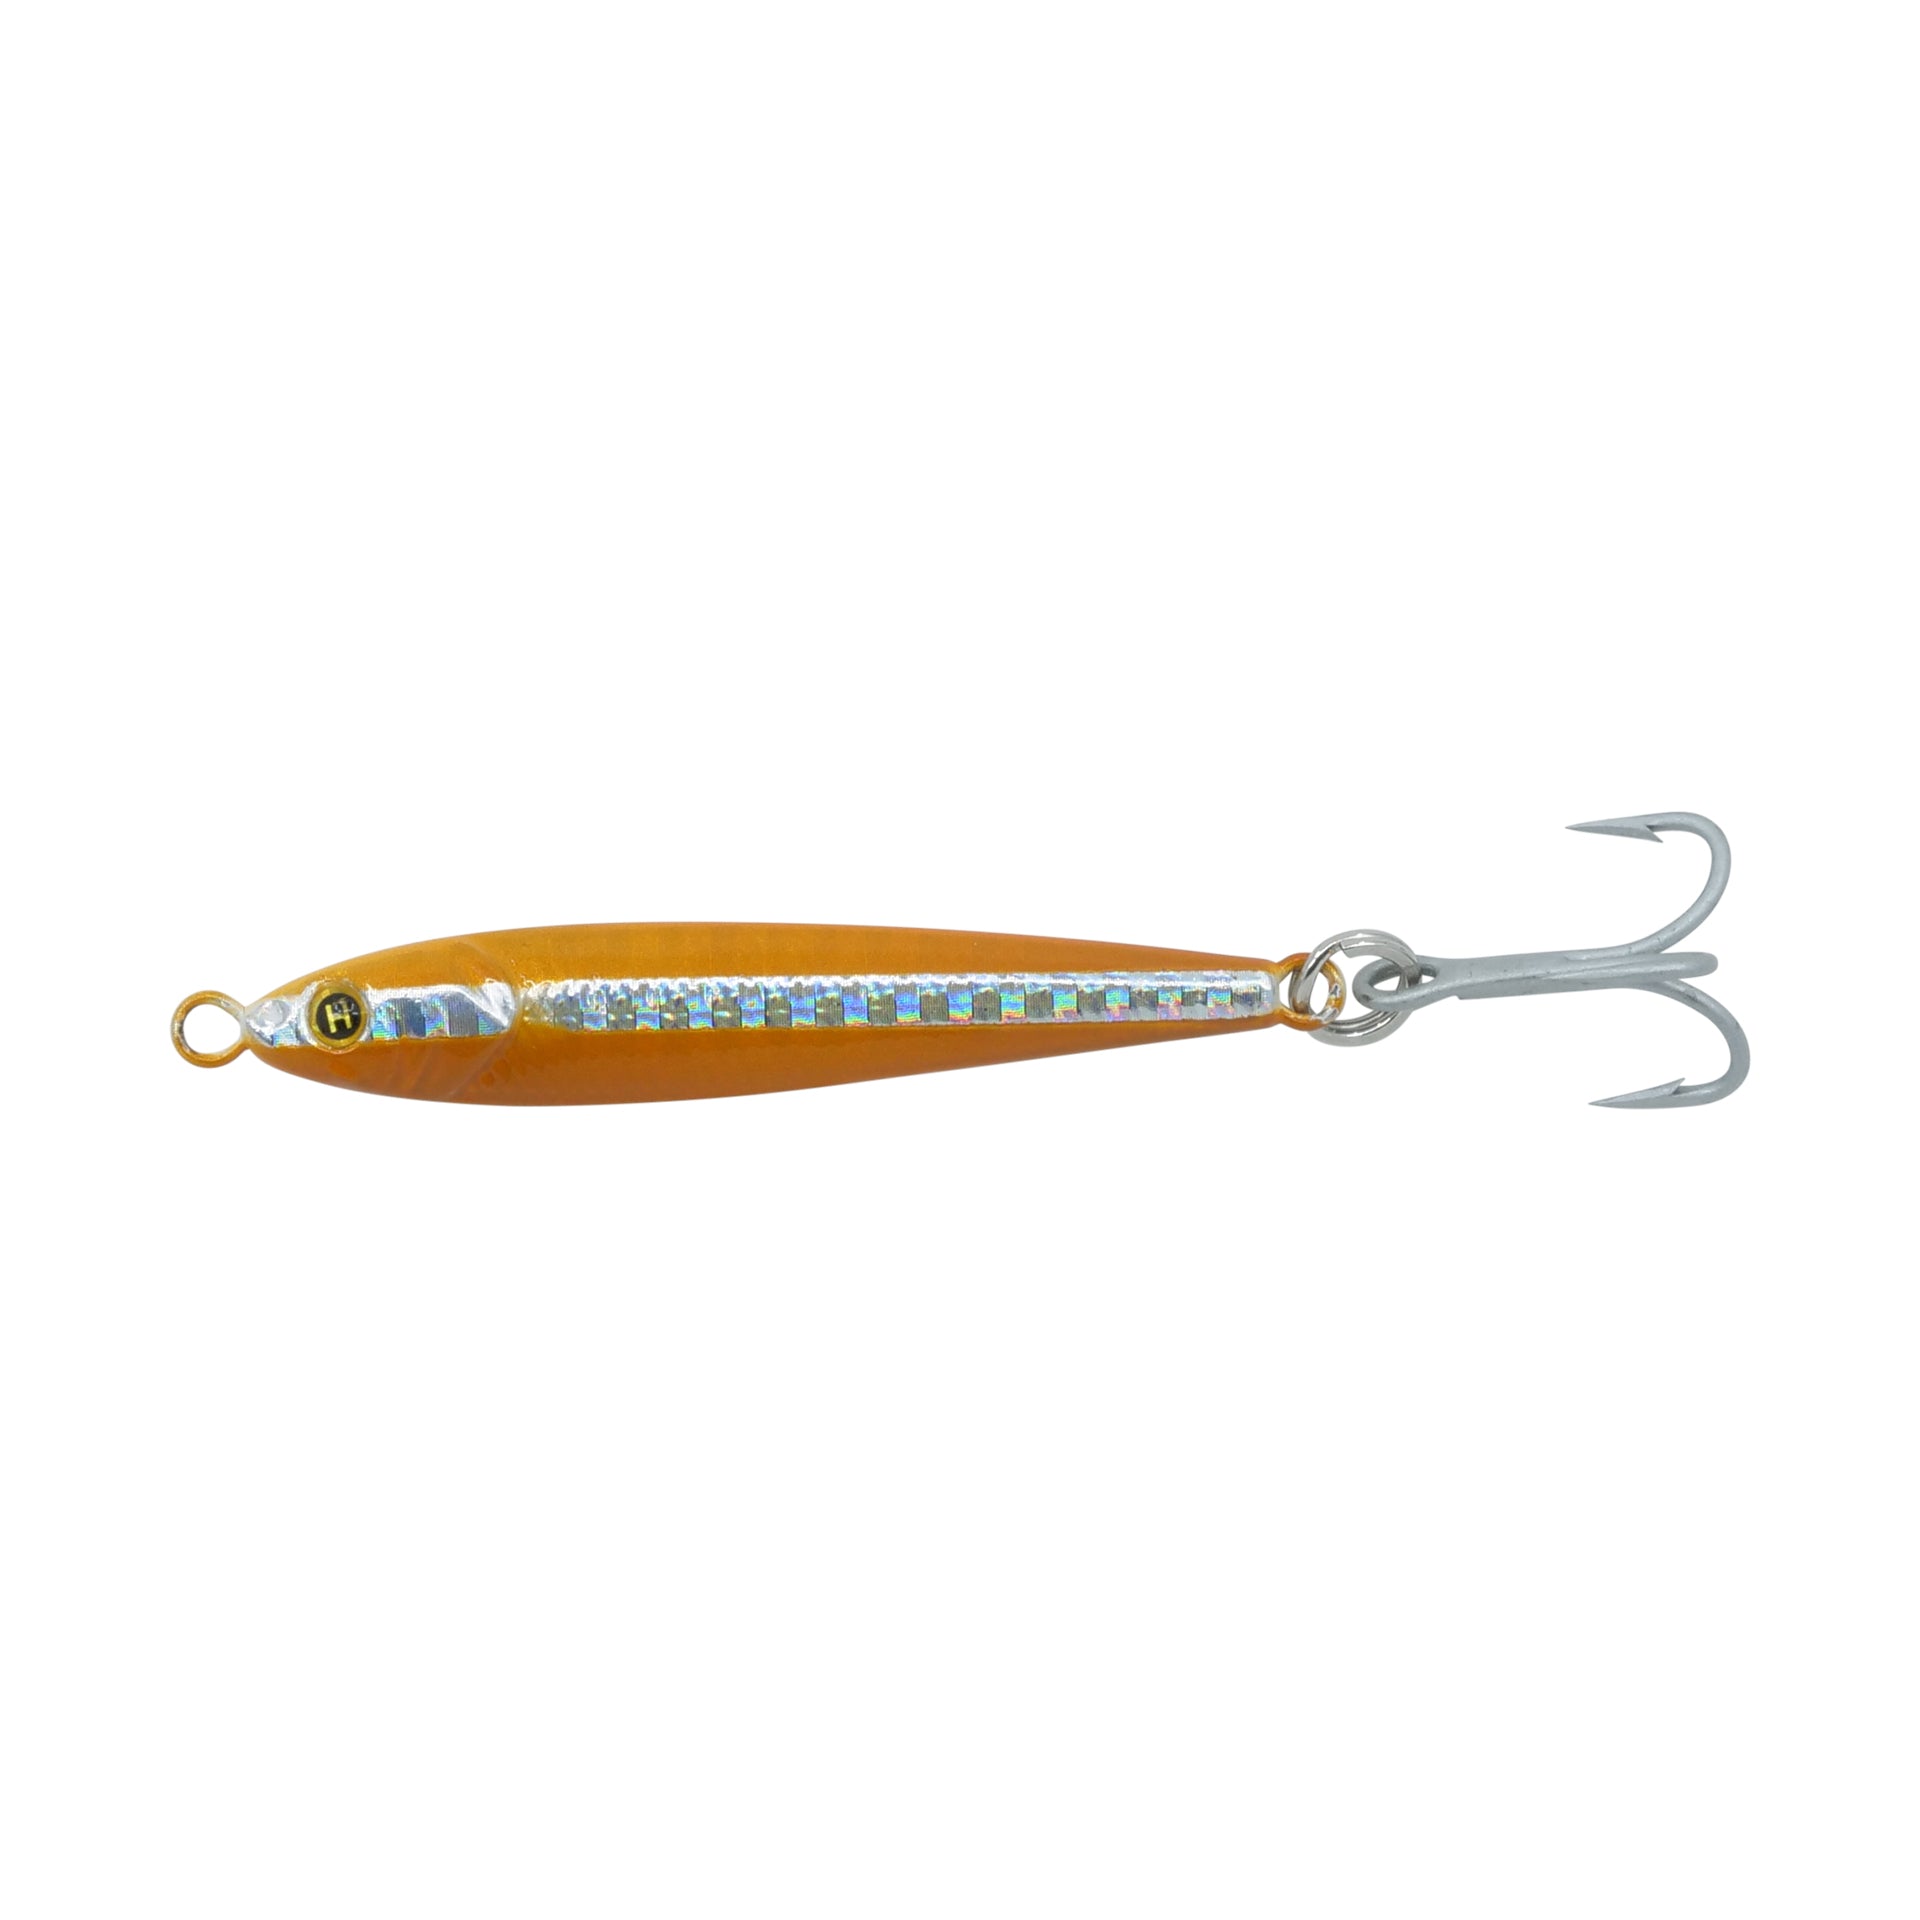 Page 14 - Buy Fishing Hooks Products Online at Best Prices in Sri Lanka